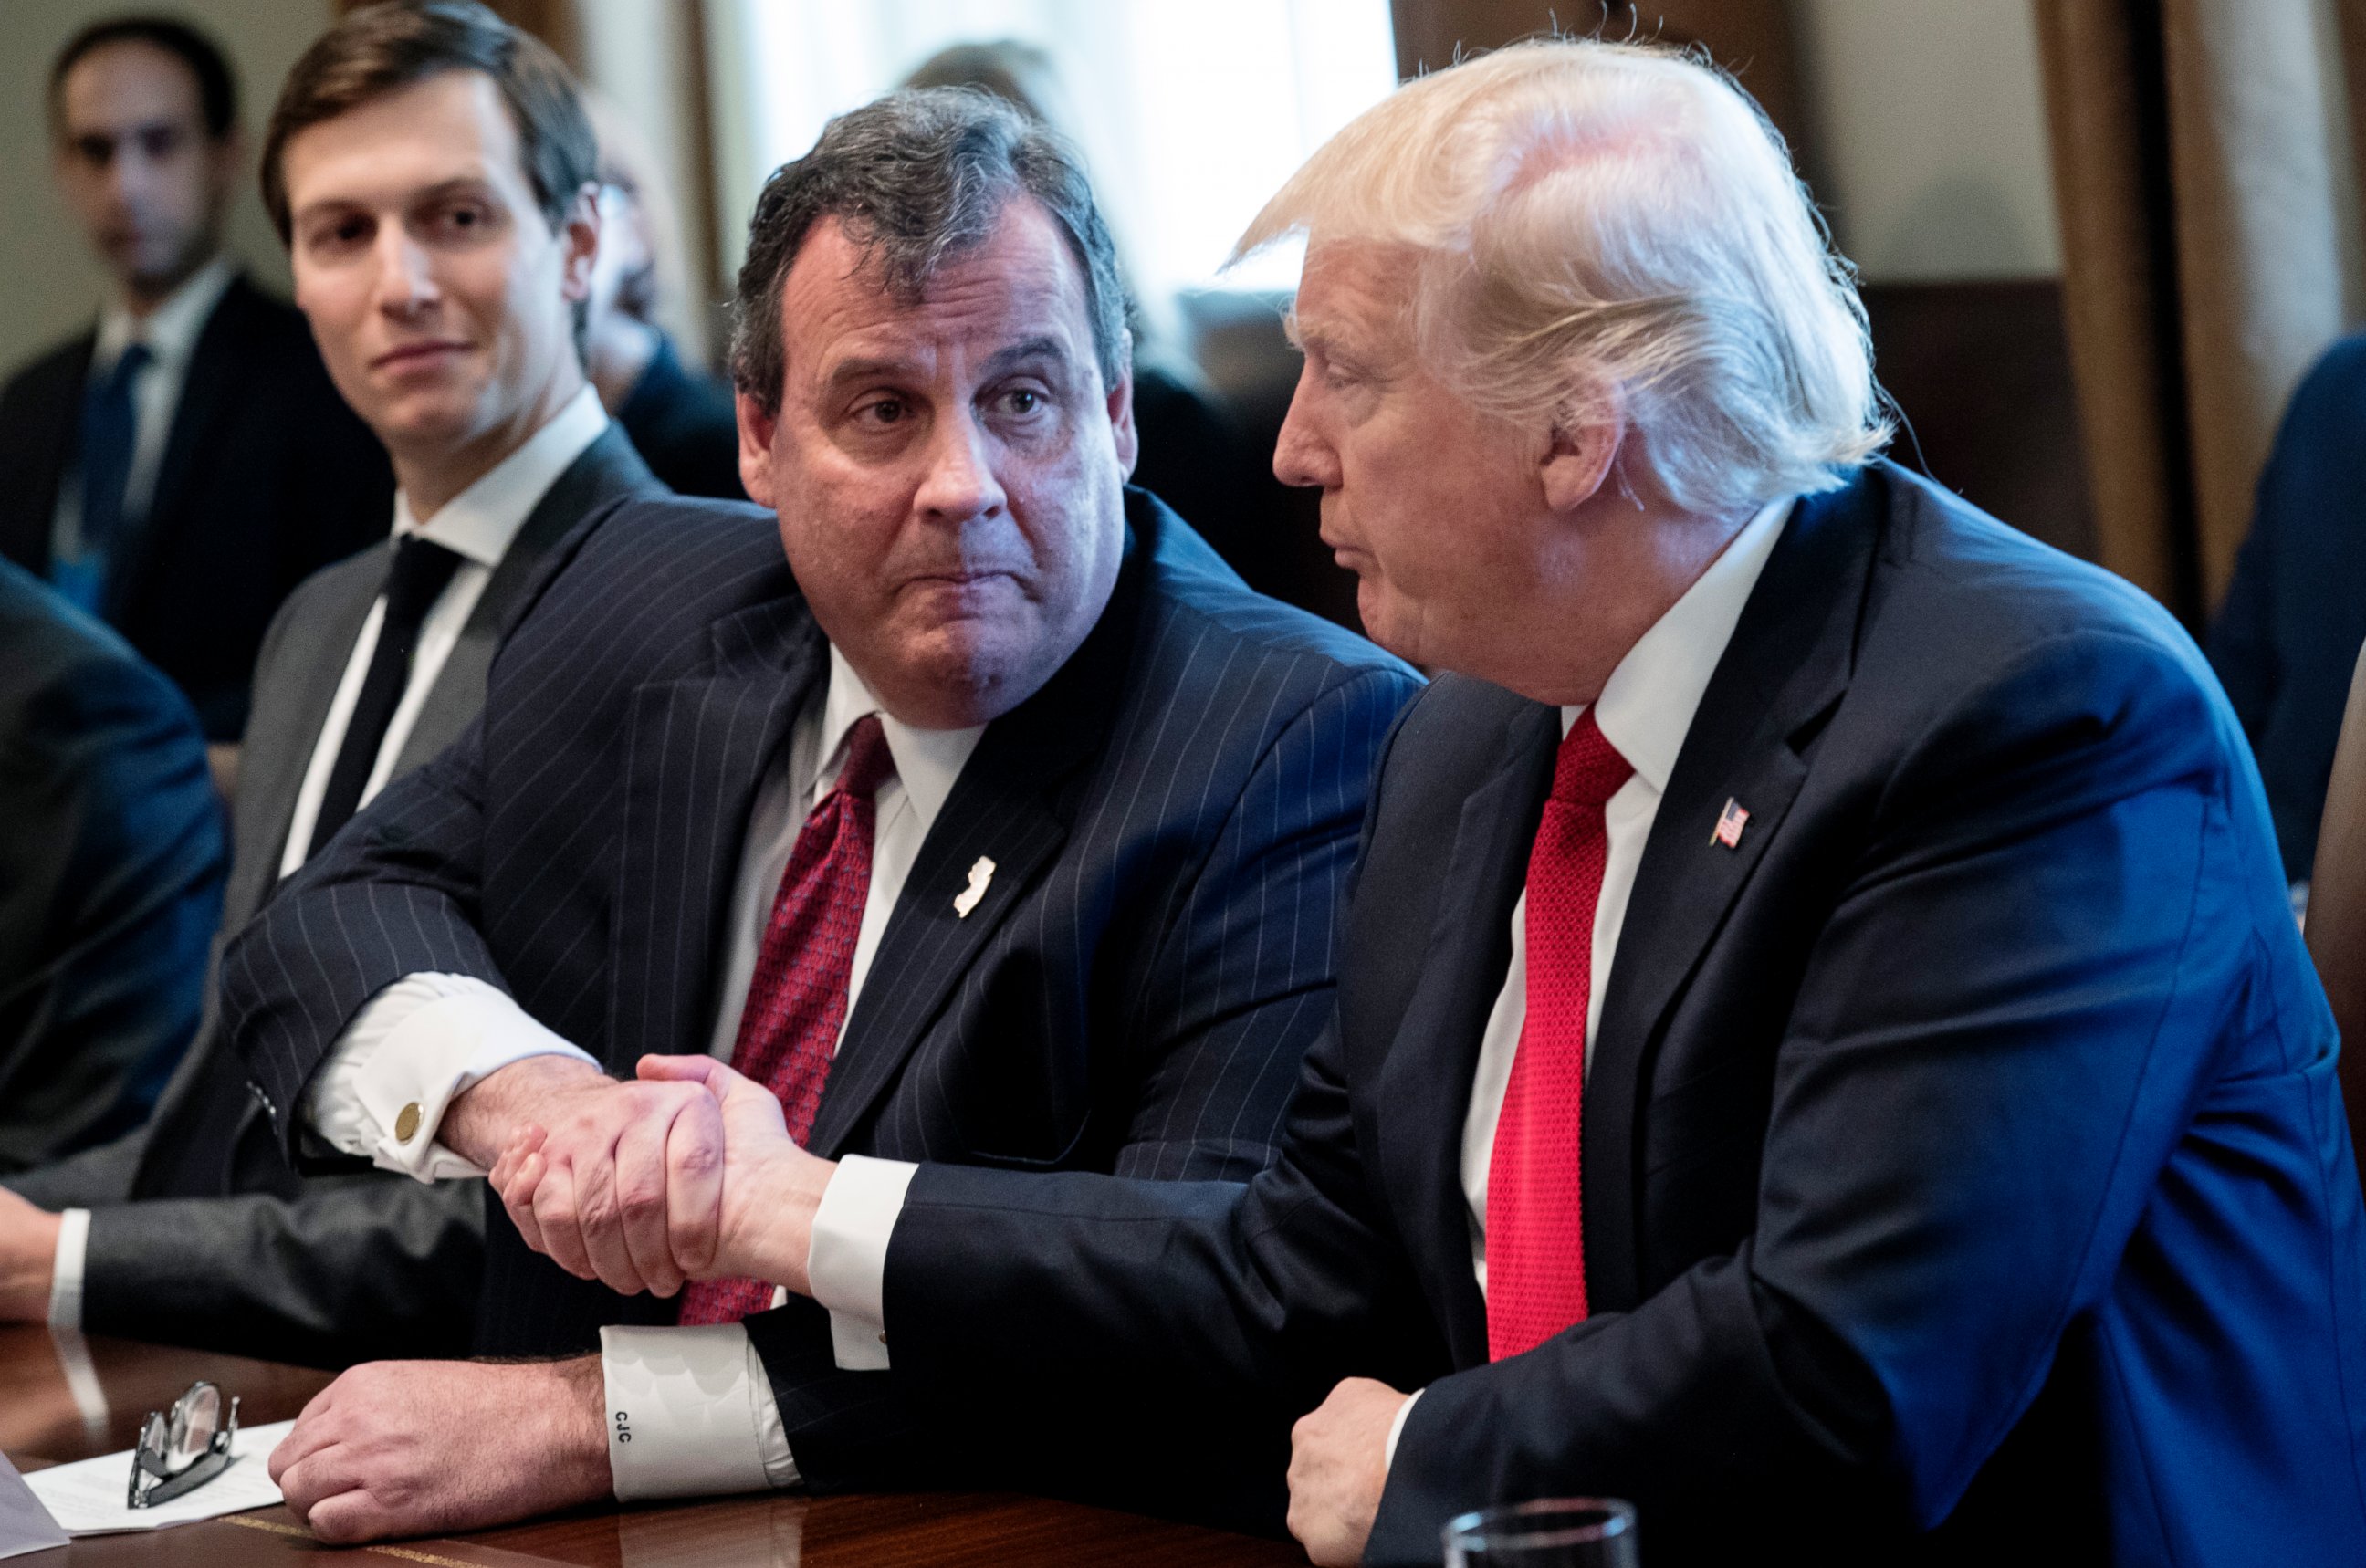 PHOTO: President Donald J. Trump shakes hands with New Jersey Governor Chris Christie , center, during an opioid and drug abuse listening session in the Roosevelt Room of the White House in Washington, March 29, 2017.